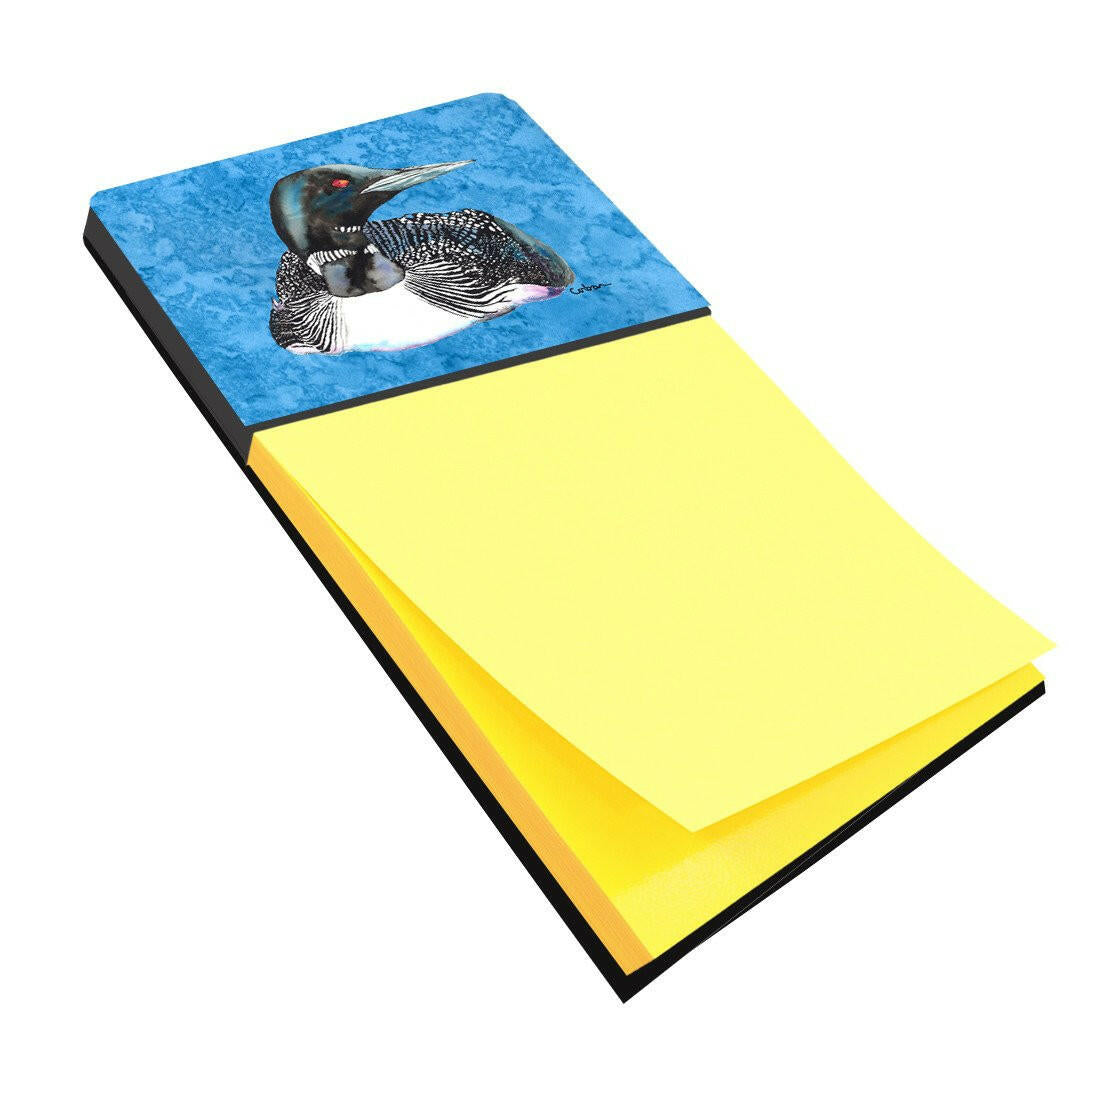 Loon Refiillable Sticky Note Holder or Postit Note Dispenser 8717SN by Caroline's Treasures